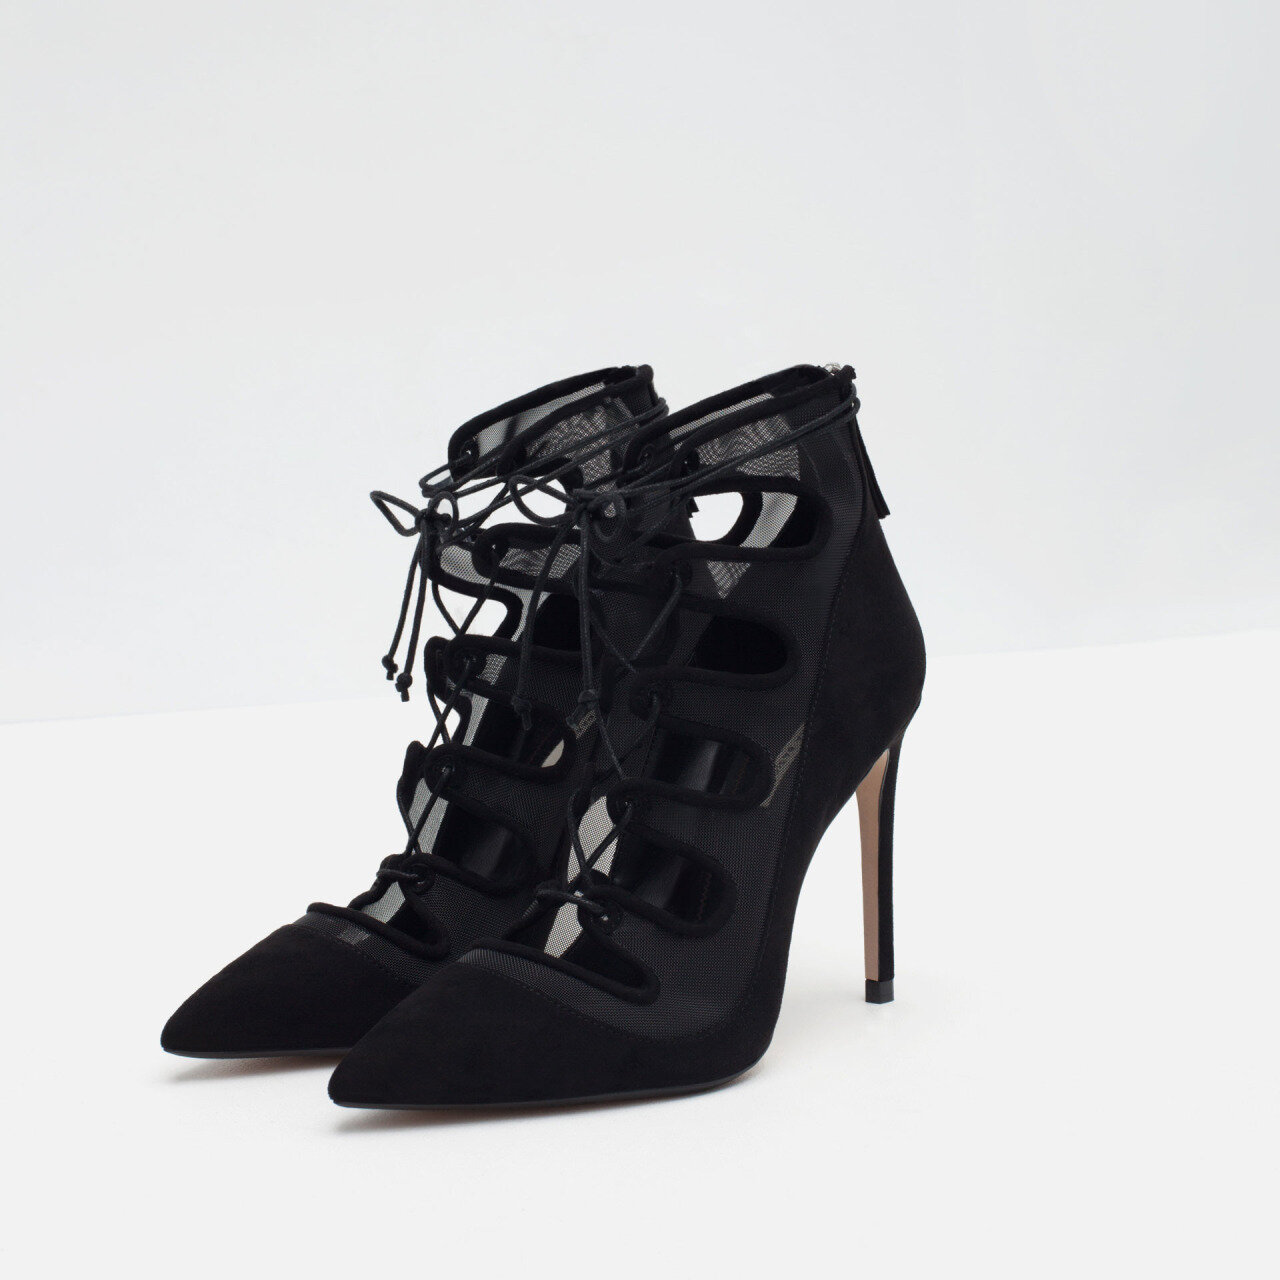 Stunning Lace Up Heels - Perfect for Any Occasion!